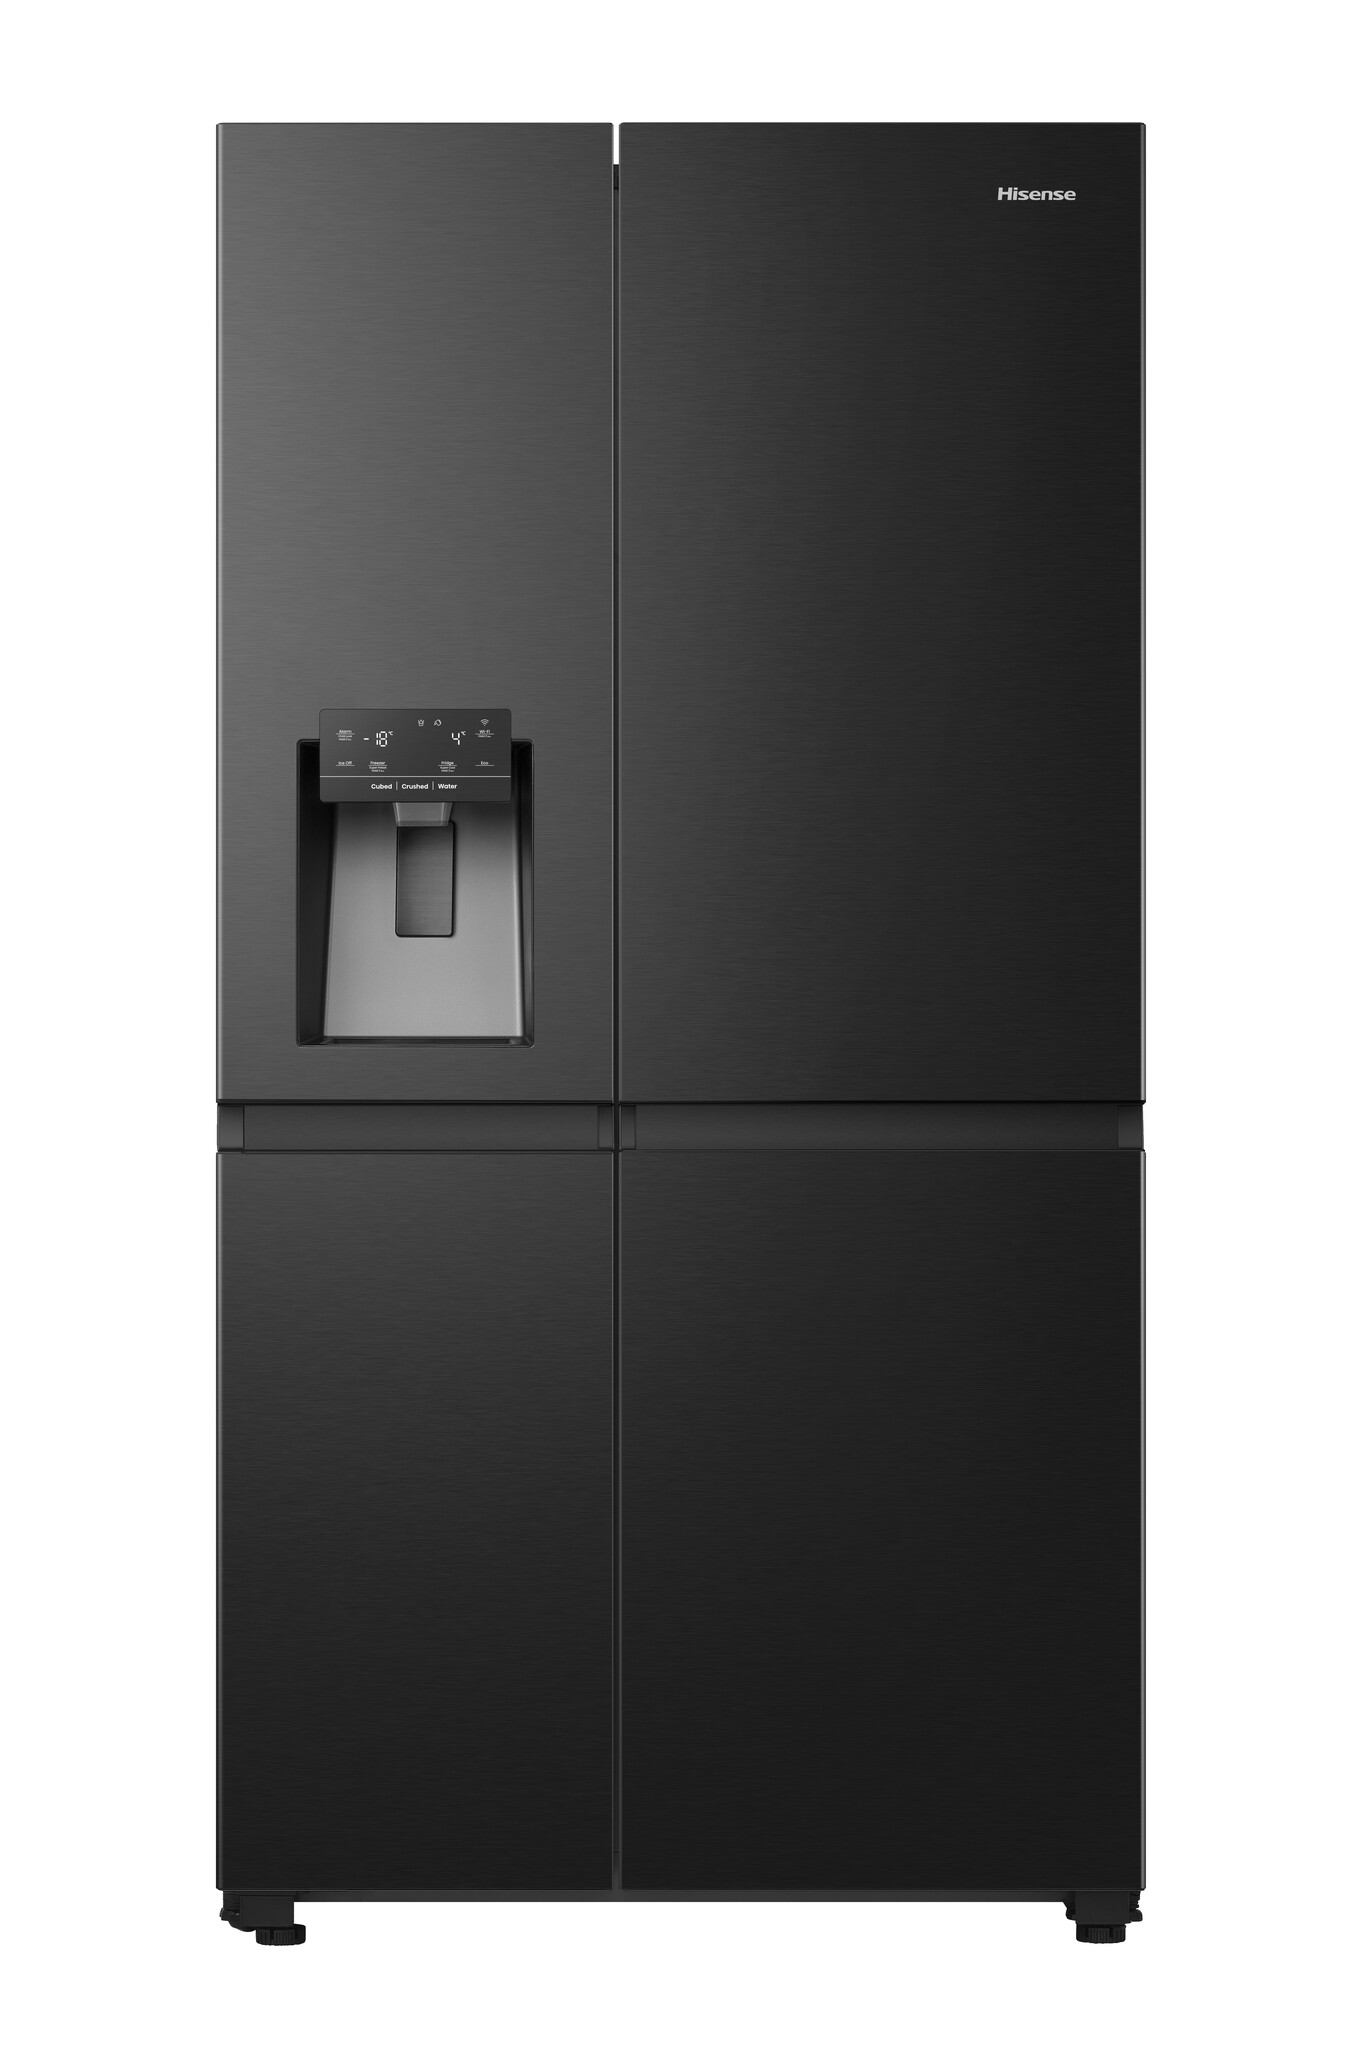 Hisense RS818N4TFE Wifi Connected Non-Plumbed Frost Free American Fridge Freezer – Black / Stainless Steel – E Rated #367305